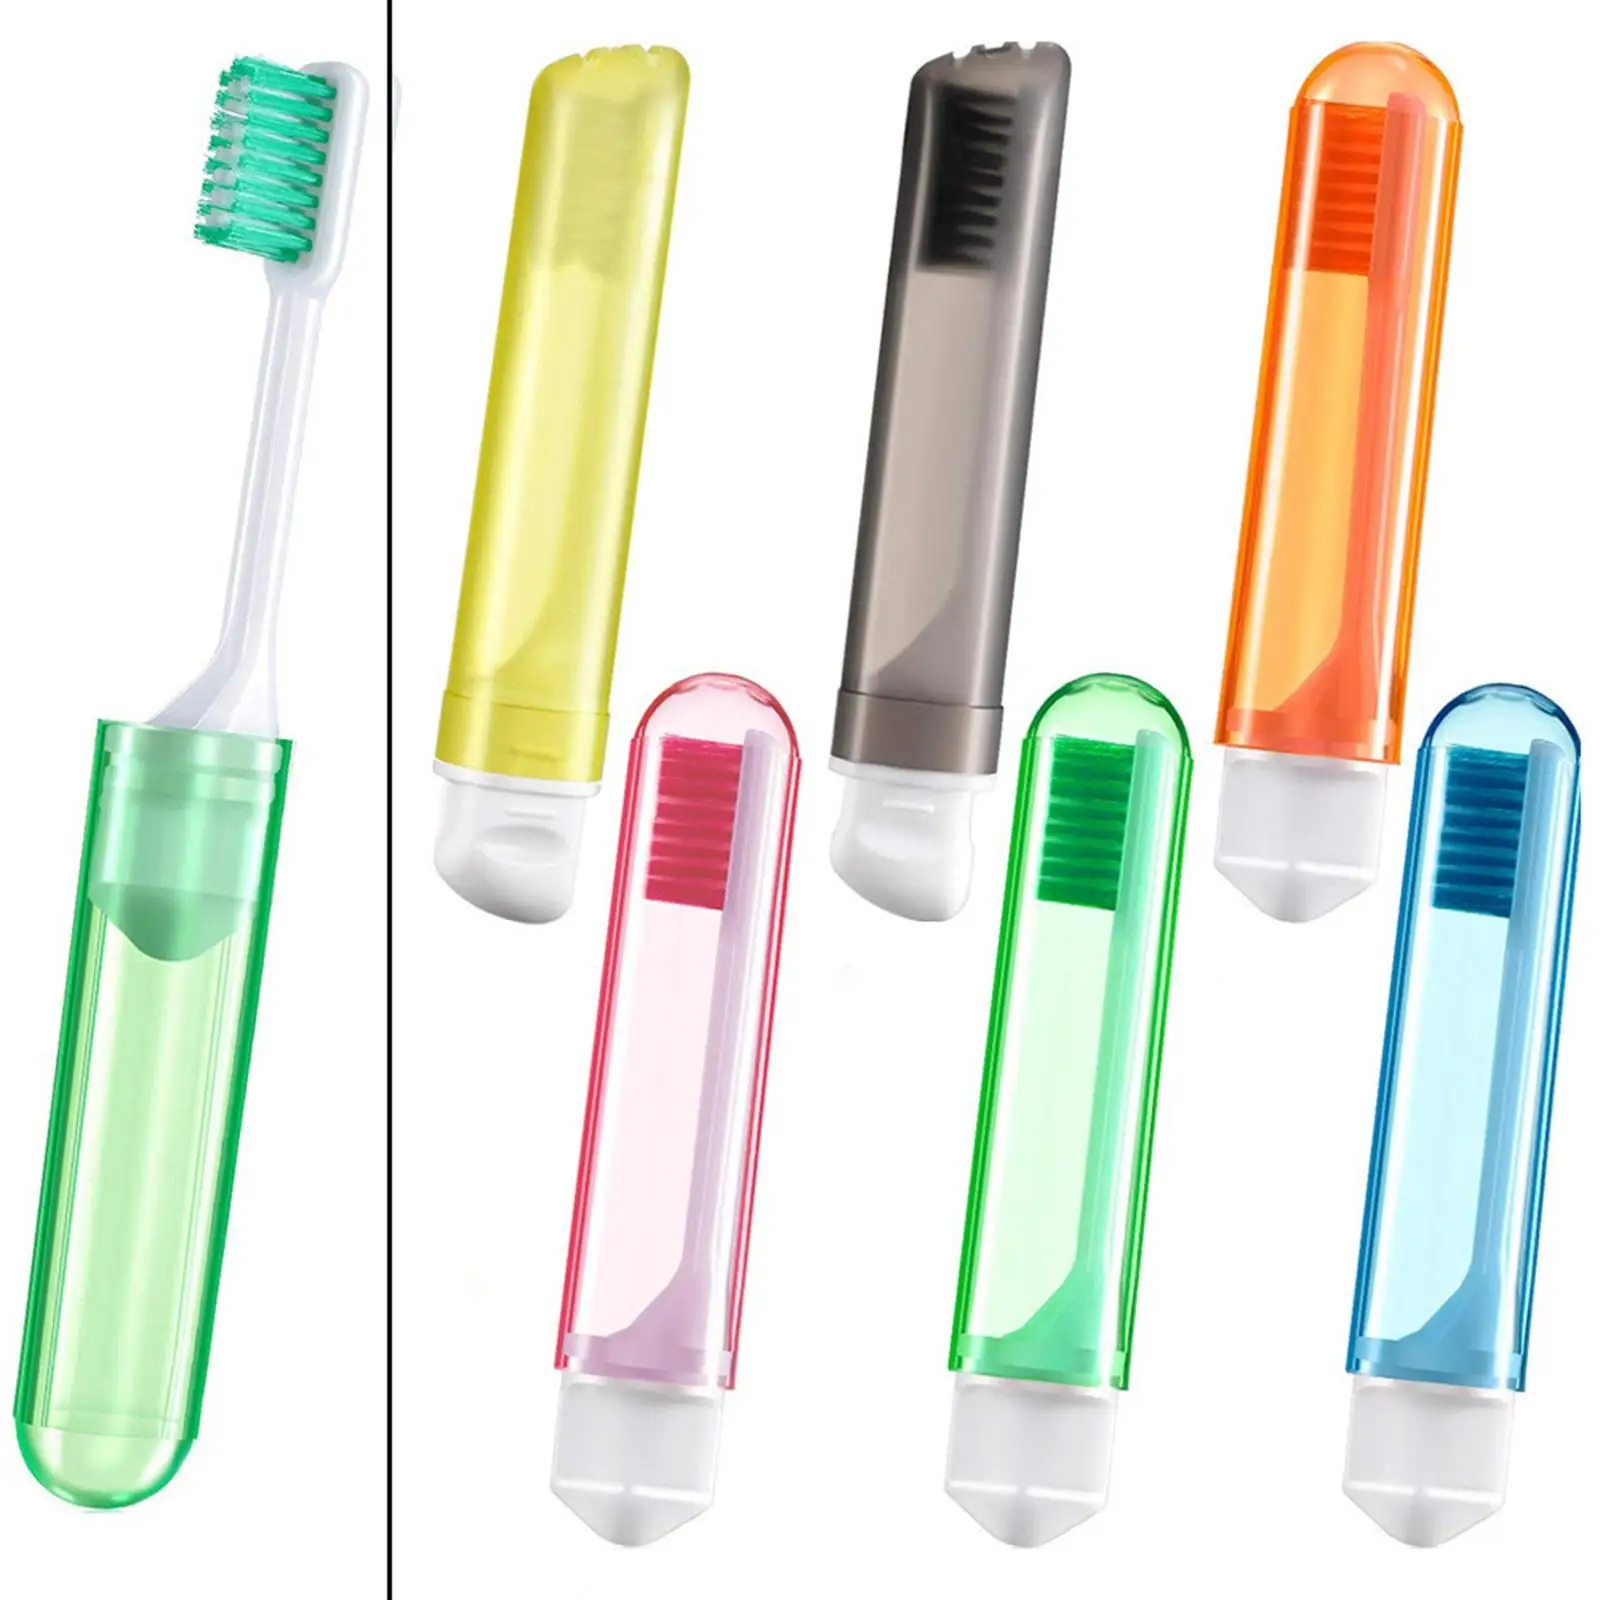 Portable Folding Toothbrush Foldable Soft Bristle Travel Size Travel Toothbrush for Camping Backpack Travel Hiking Kids Adults